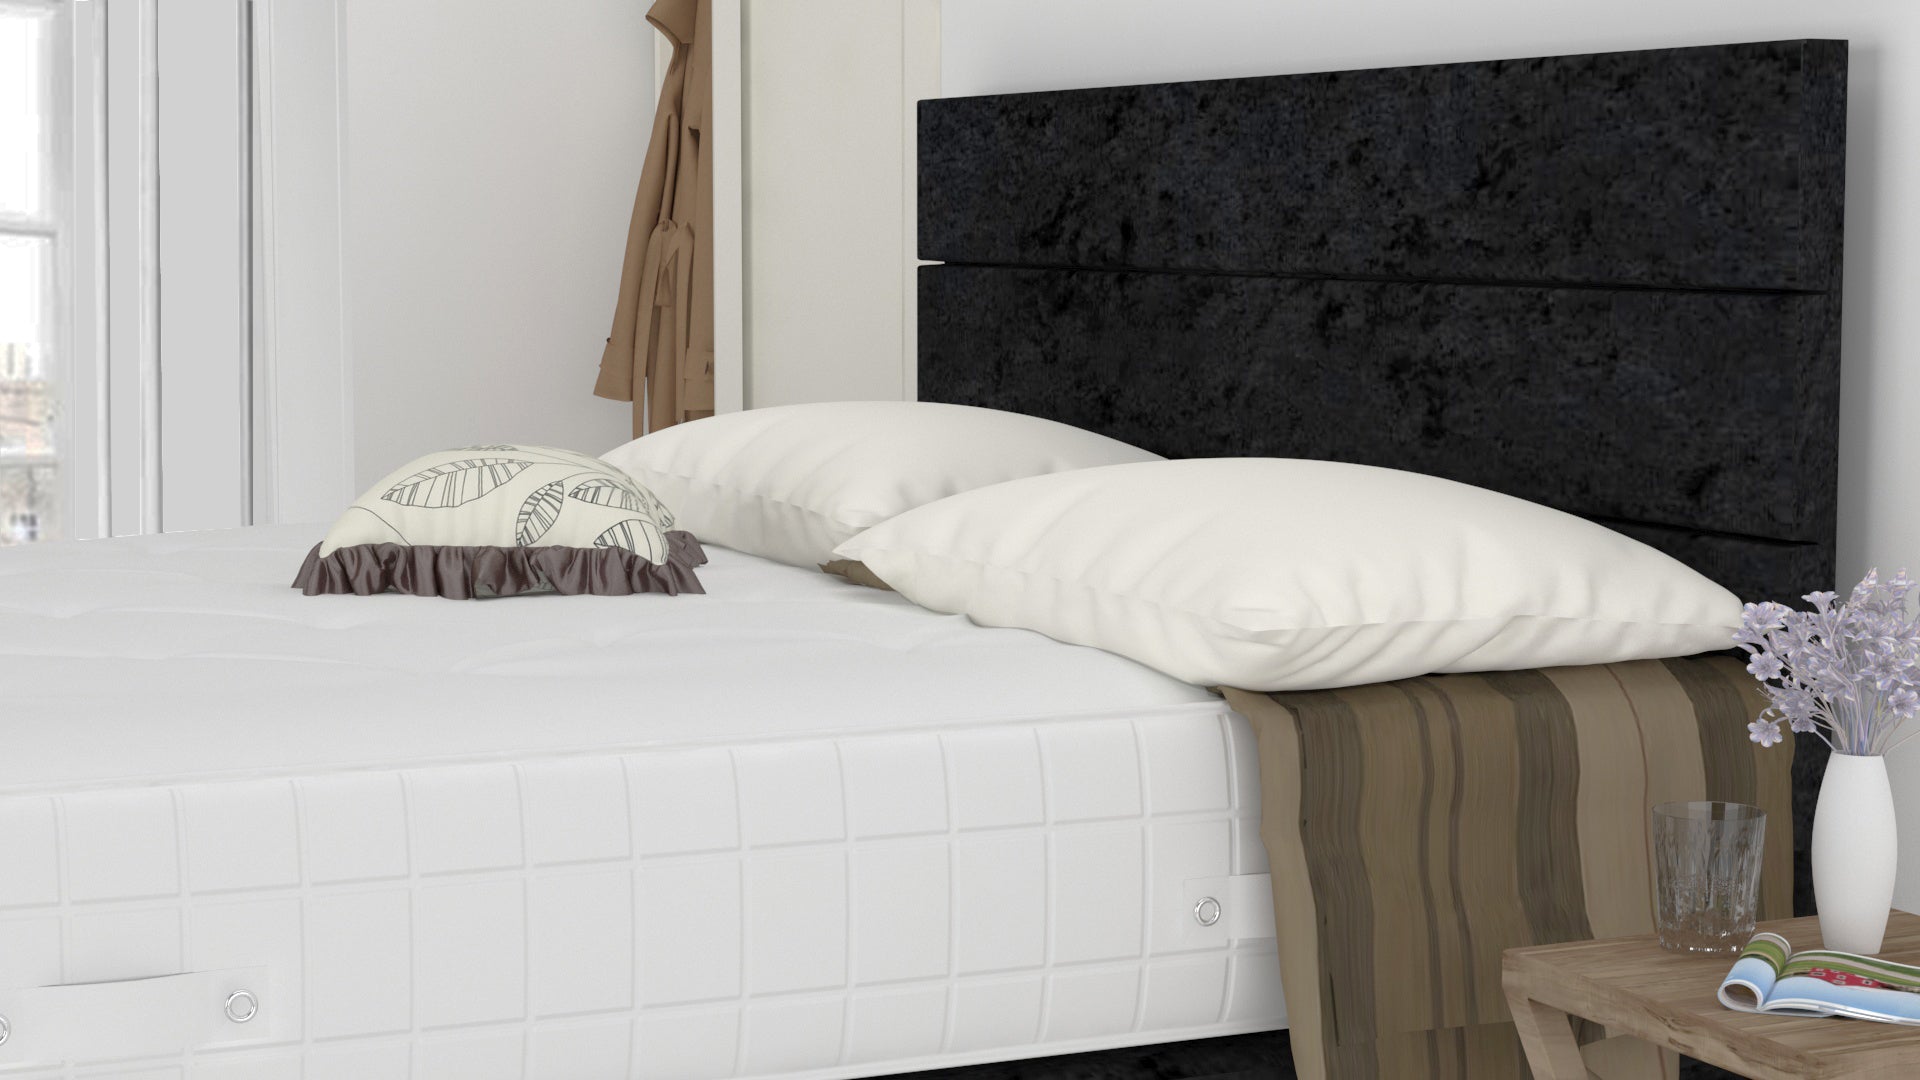 Black Crushed 4 Feet Divan Bed Set With 3 Panel Headboard (Included Feet) And Free Pillow Top Mattress